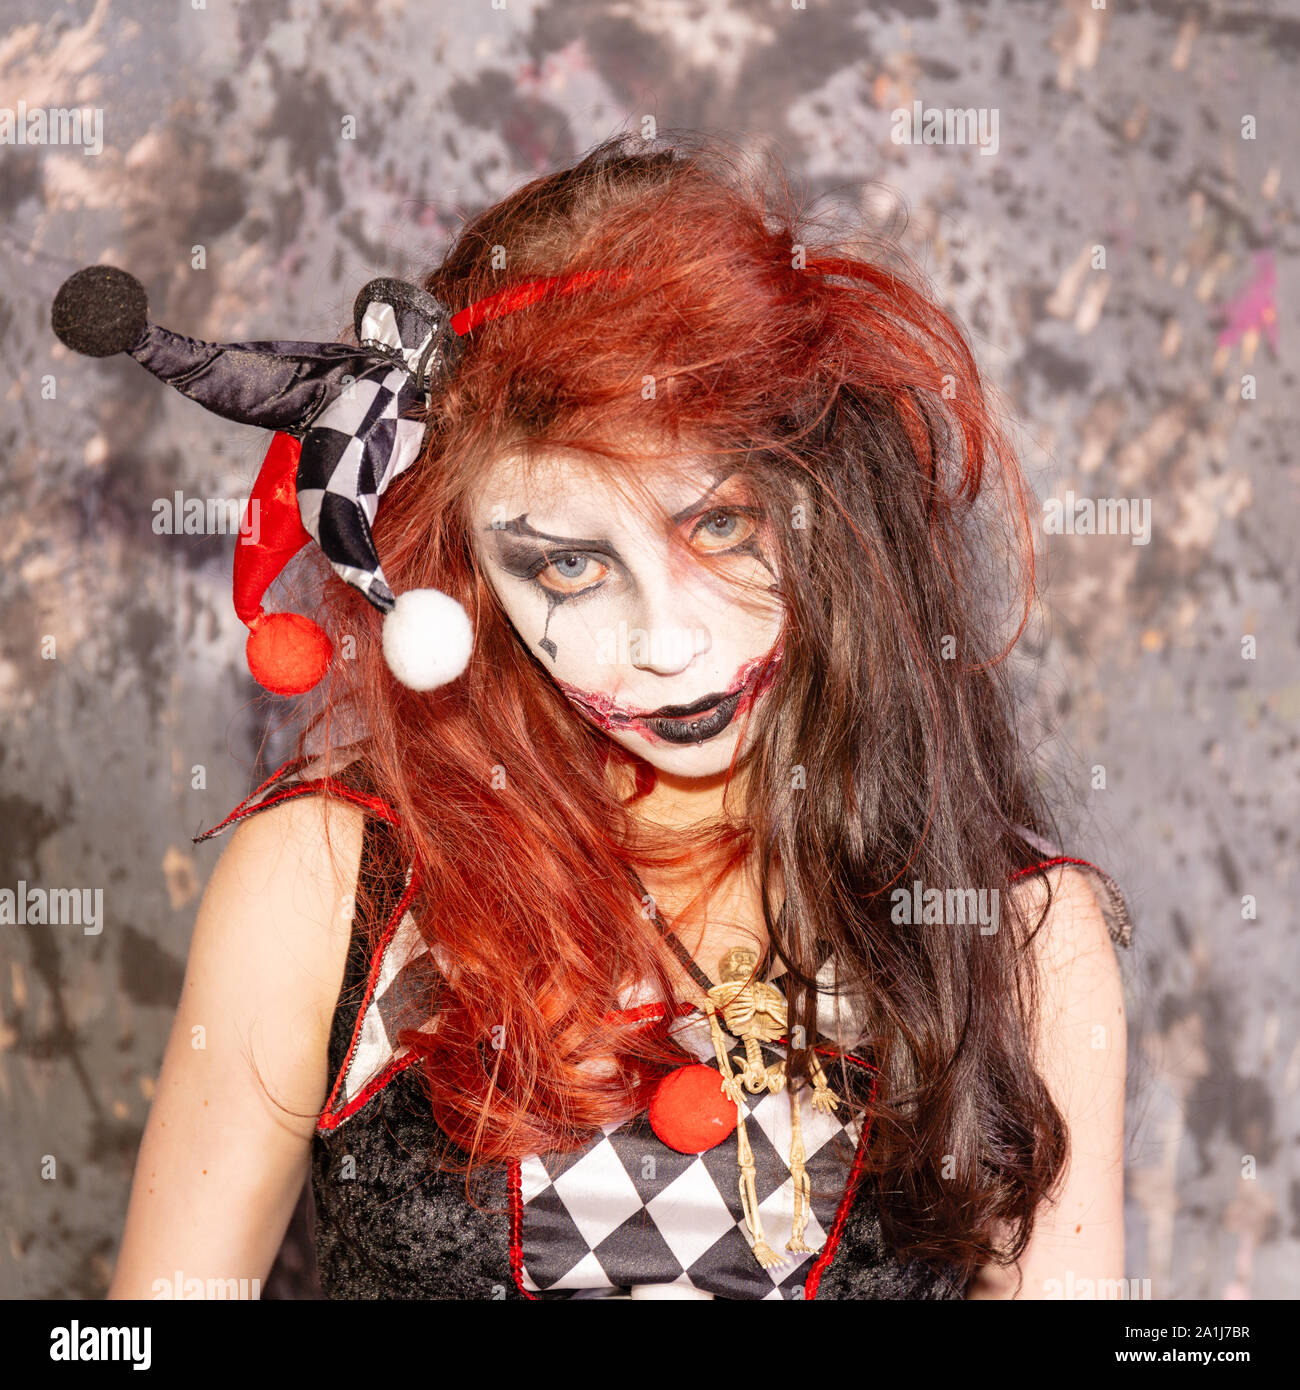 Young female in Harlequin costume smiles wickedly as blood oozes from her mouth Stock Photo